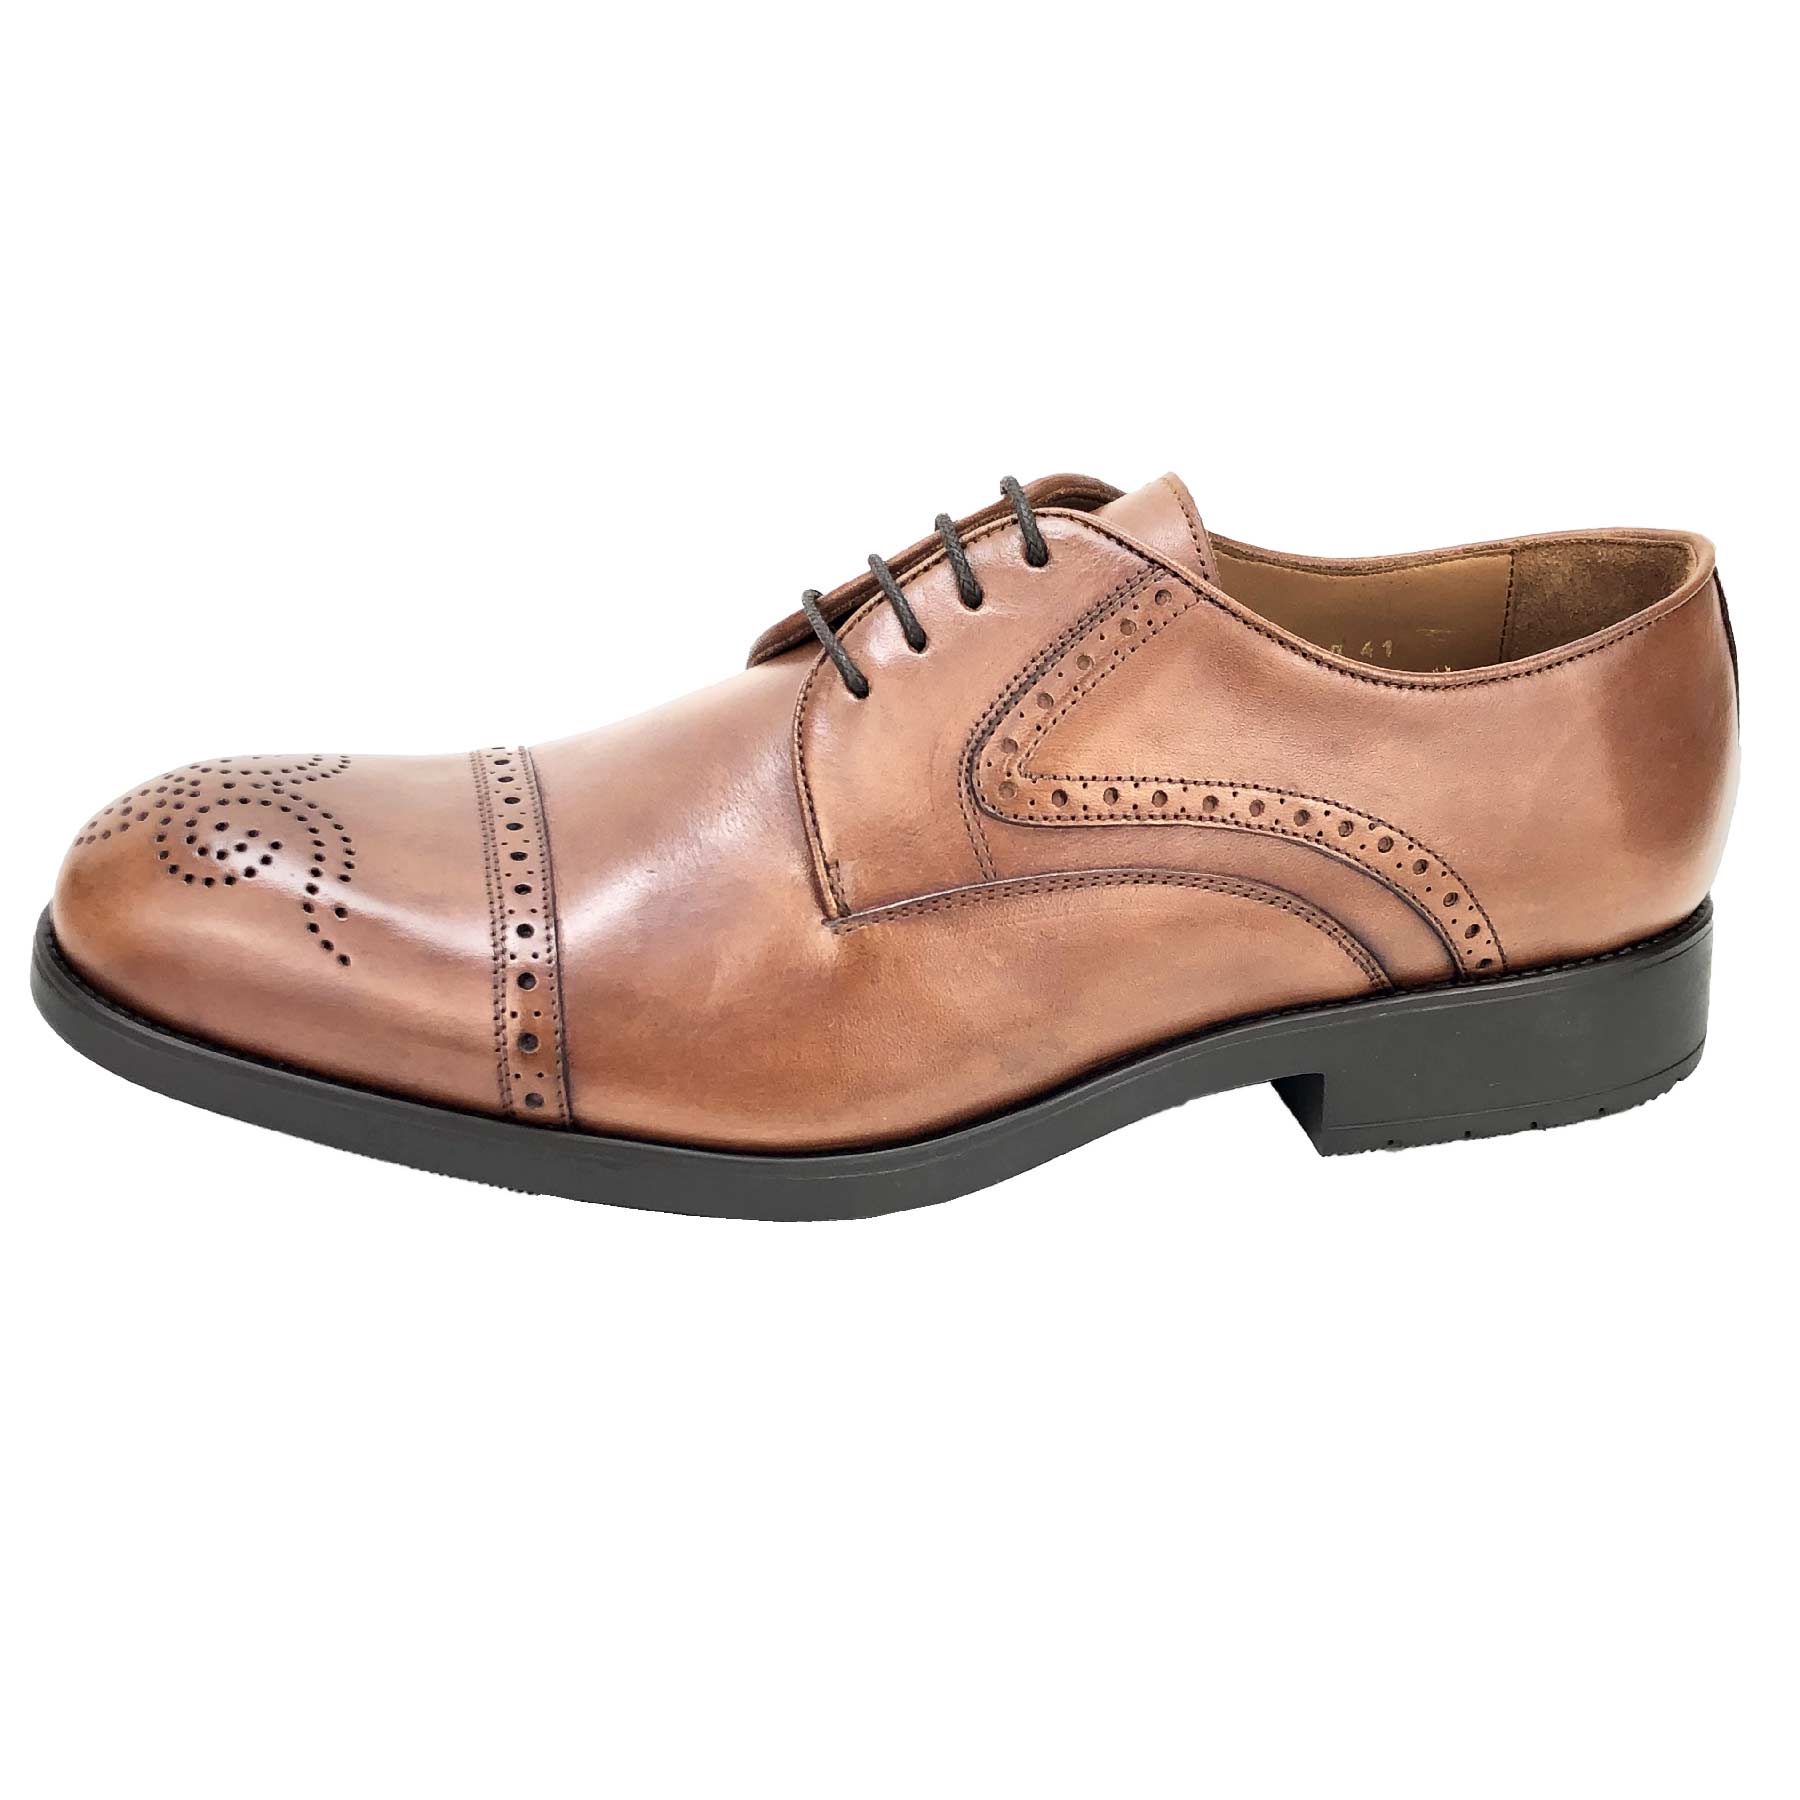 CH1540-019  - Chaussure Cuir taba - deluxe-maroc